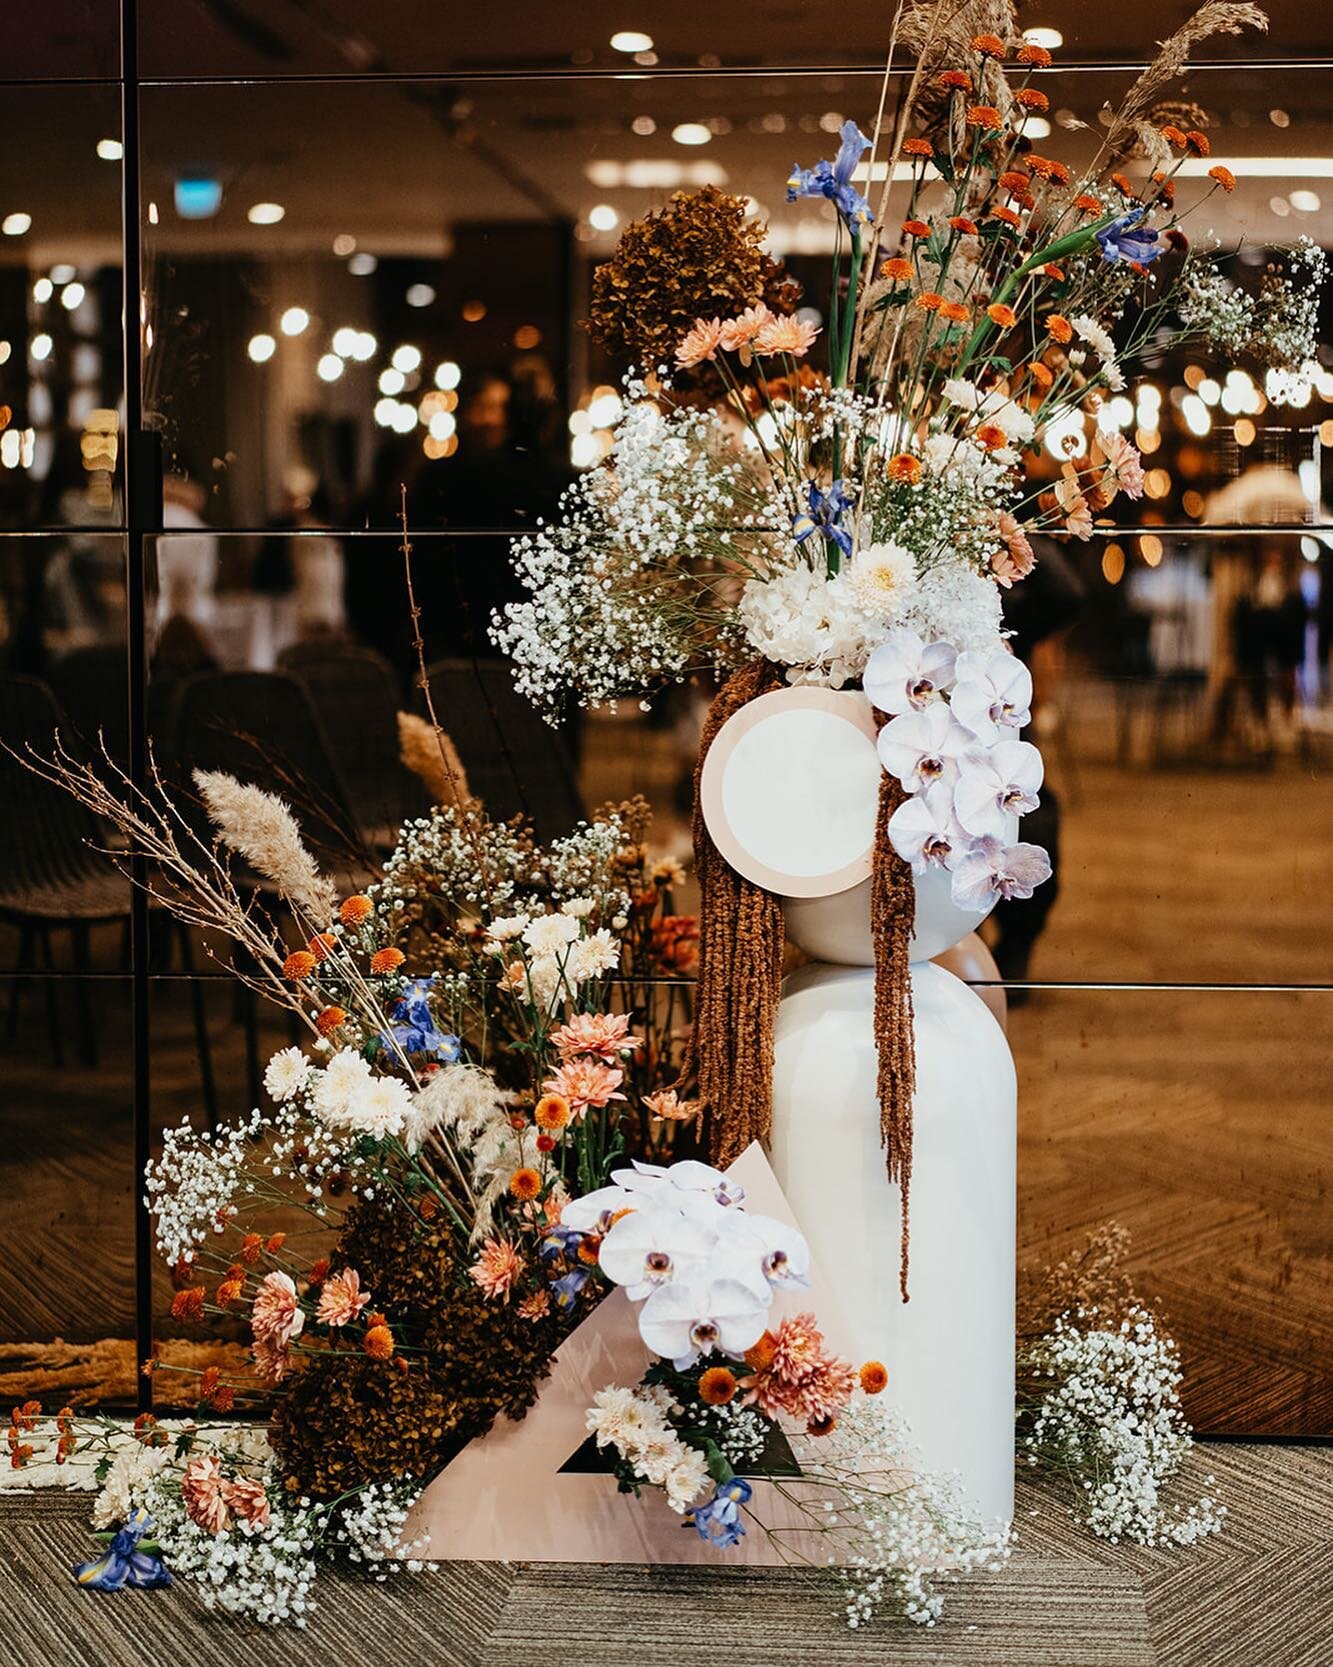 First up! Ceremony backdrop for the beautiful space @ovoloweddings that is The Burbs. Ditch the traditional arch and bring on the colors, geometric shapes and really show off your personality! DO IT 🤟🏻

Team on board 🎉
Photographer @lostinadazepho